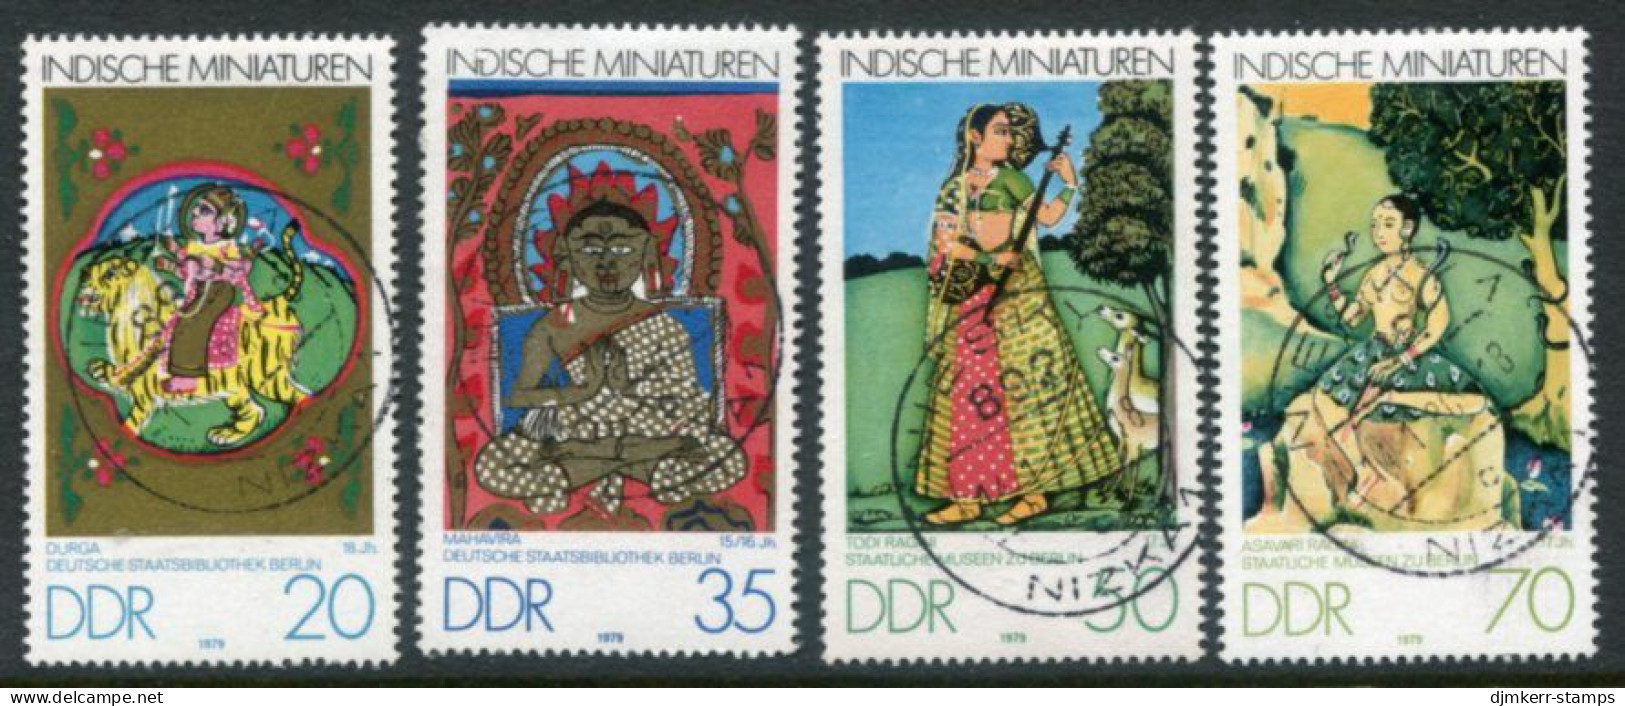 DDR / E. GERMANY 1979 Indian Miniatures Used.  Michel  2418-21 - Usados